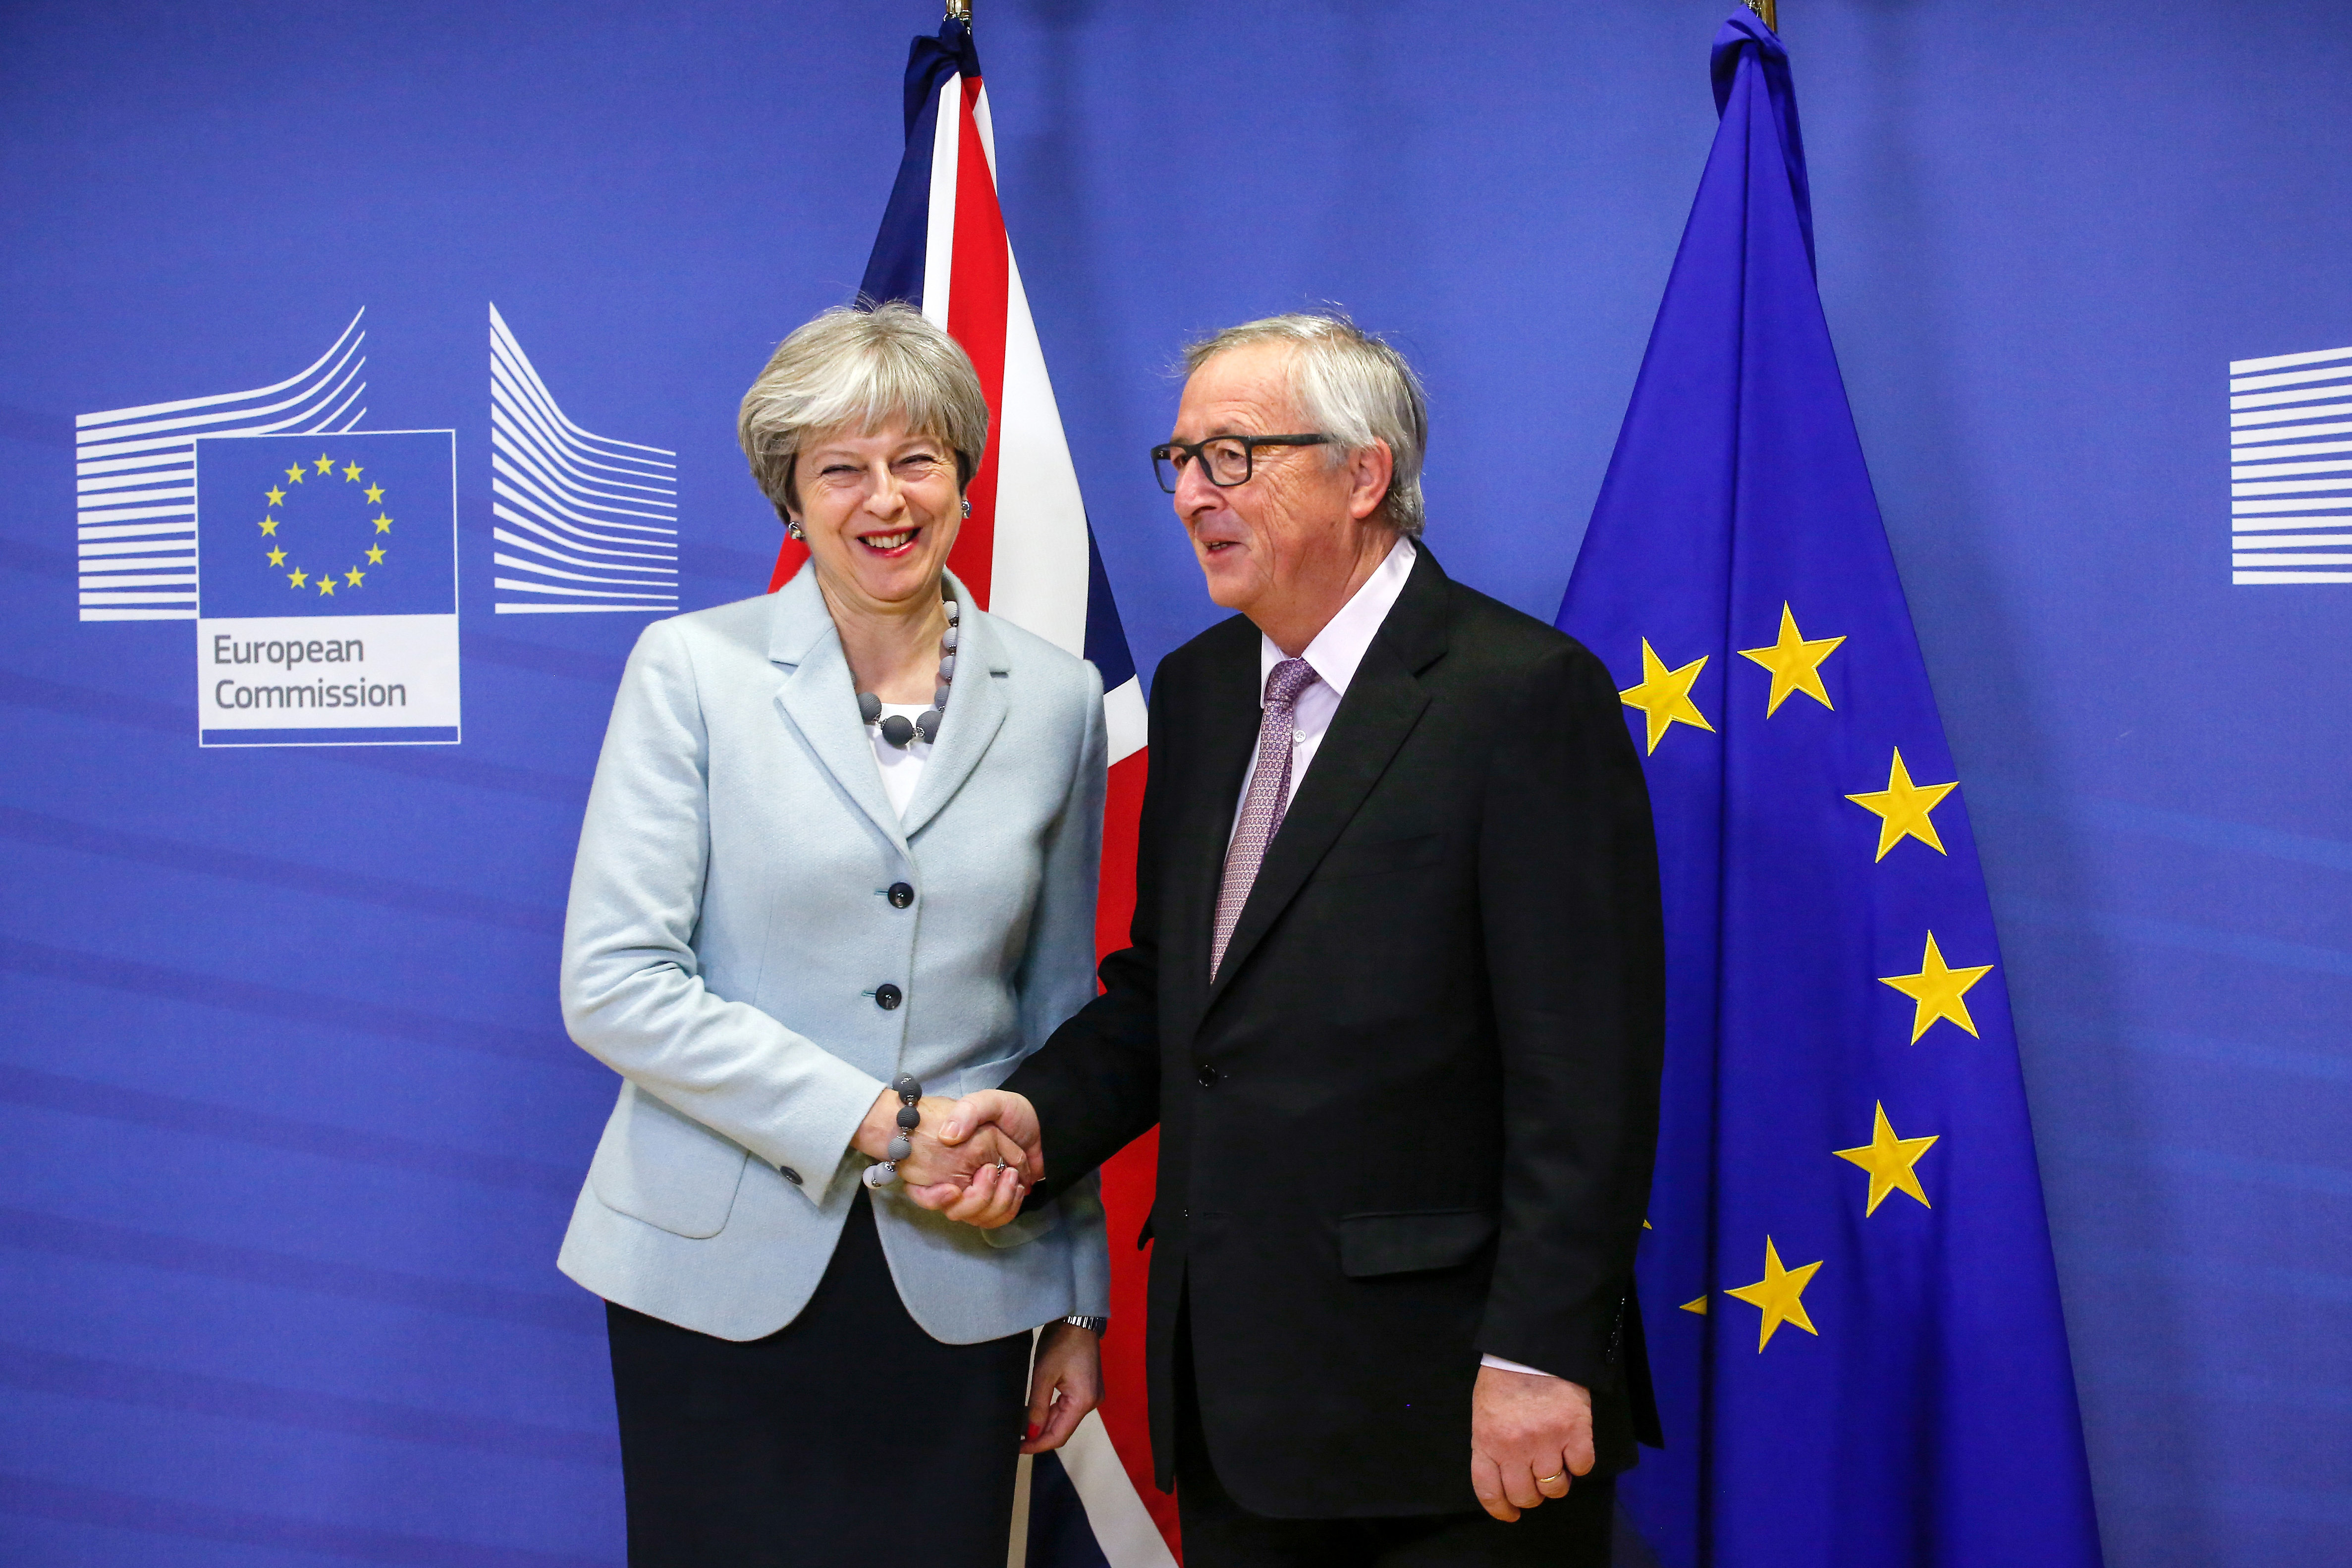 Theresa May shakes hands with European Commission President Jean-Claude Juncker.